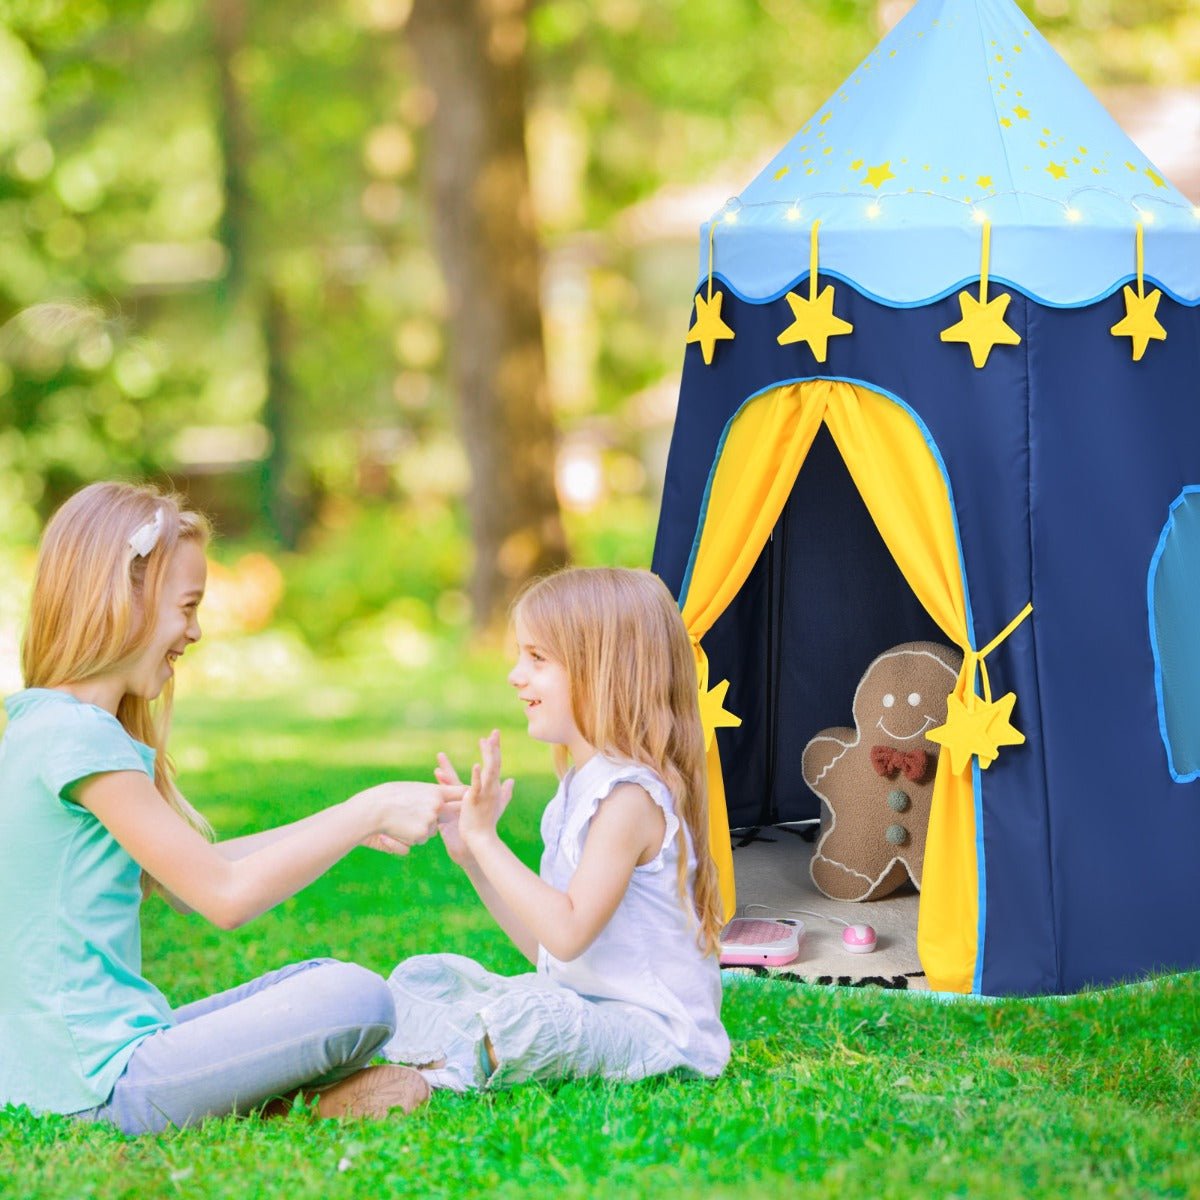 Magical Nights: Kids Play Tent with Star Lights & Foldable Design